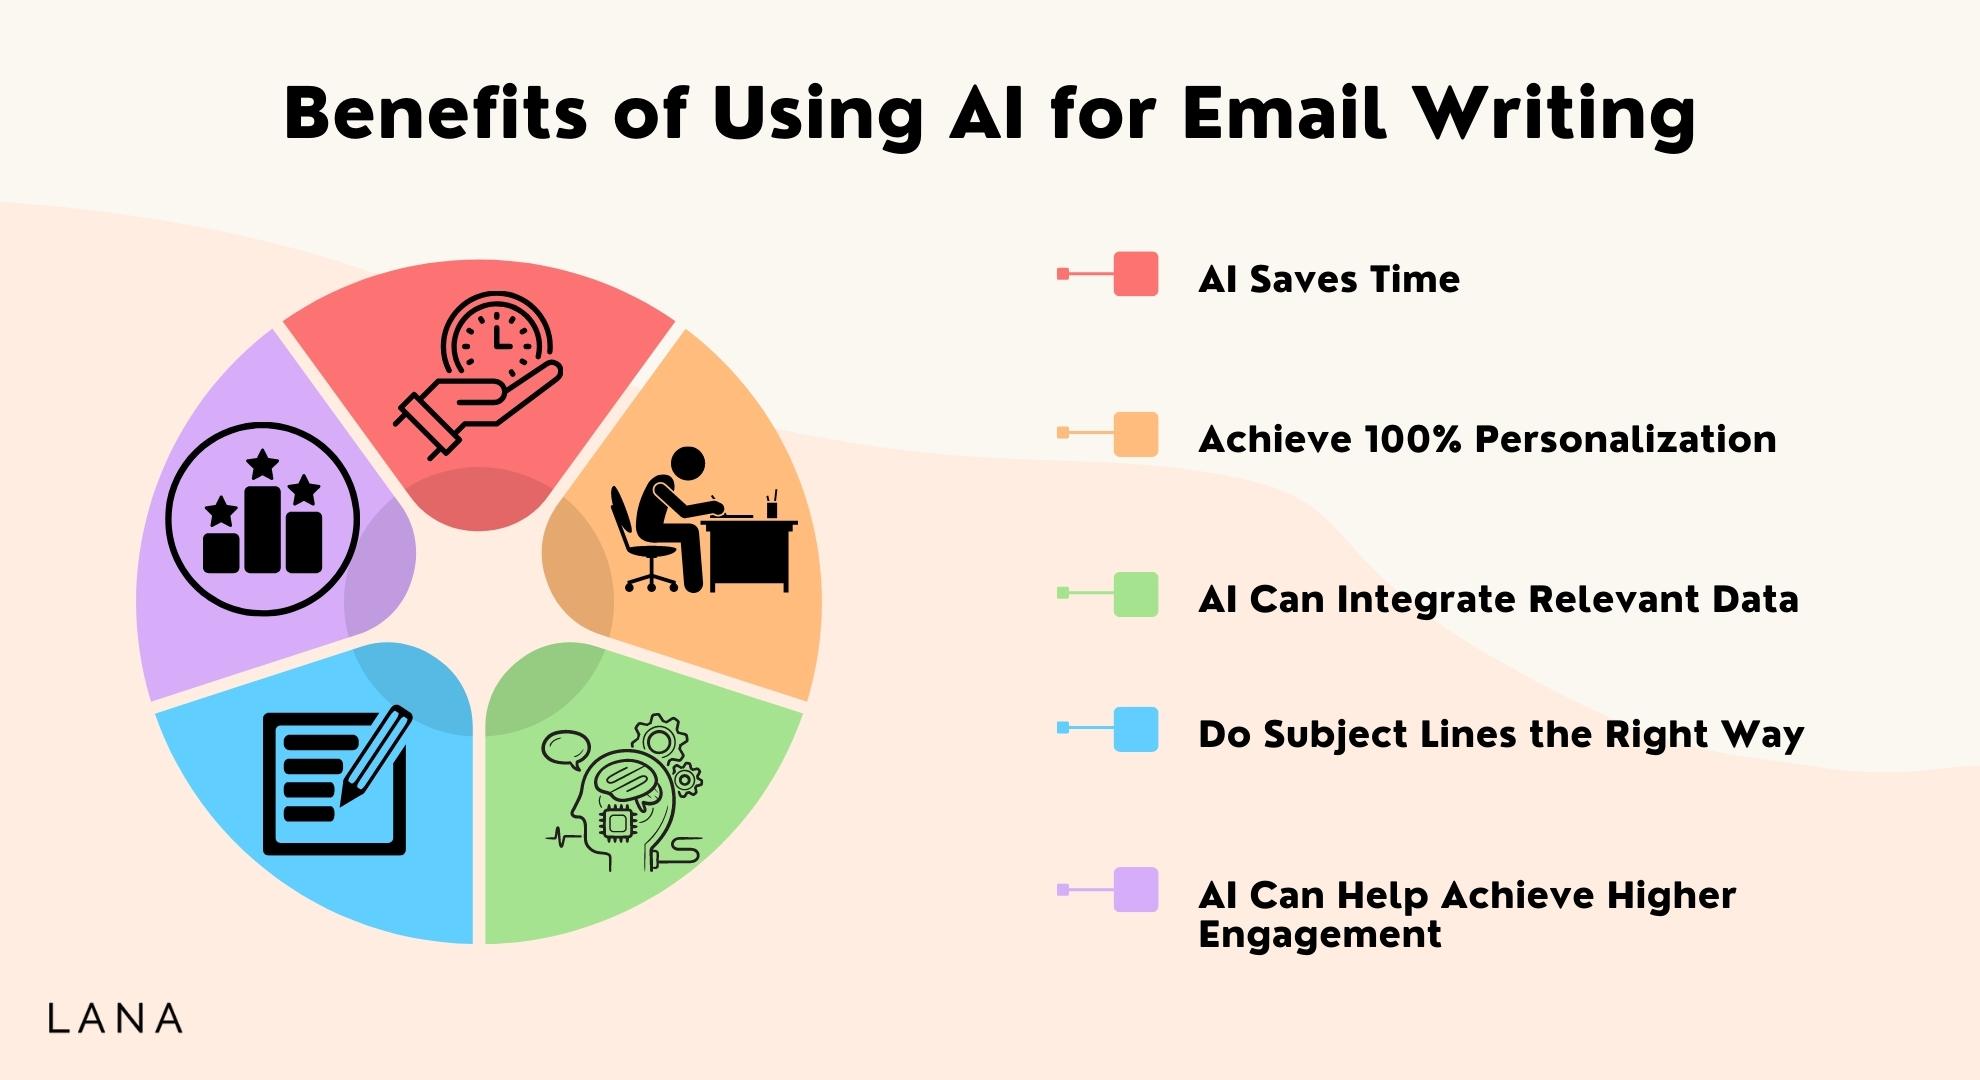 Listing the Benefits of Using AI for Email Writing